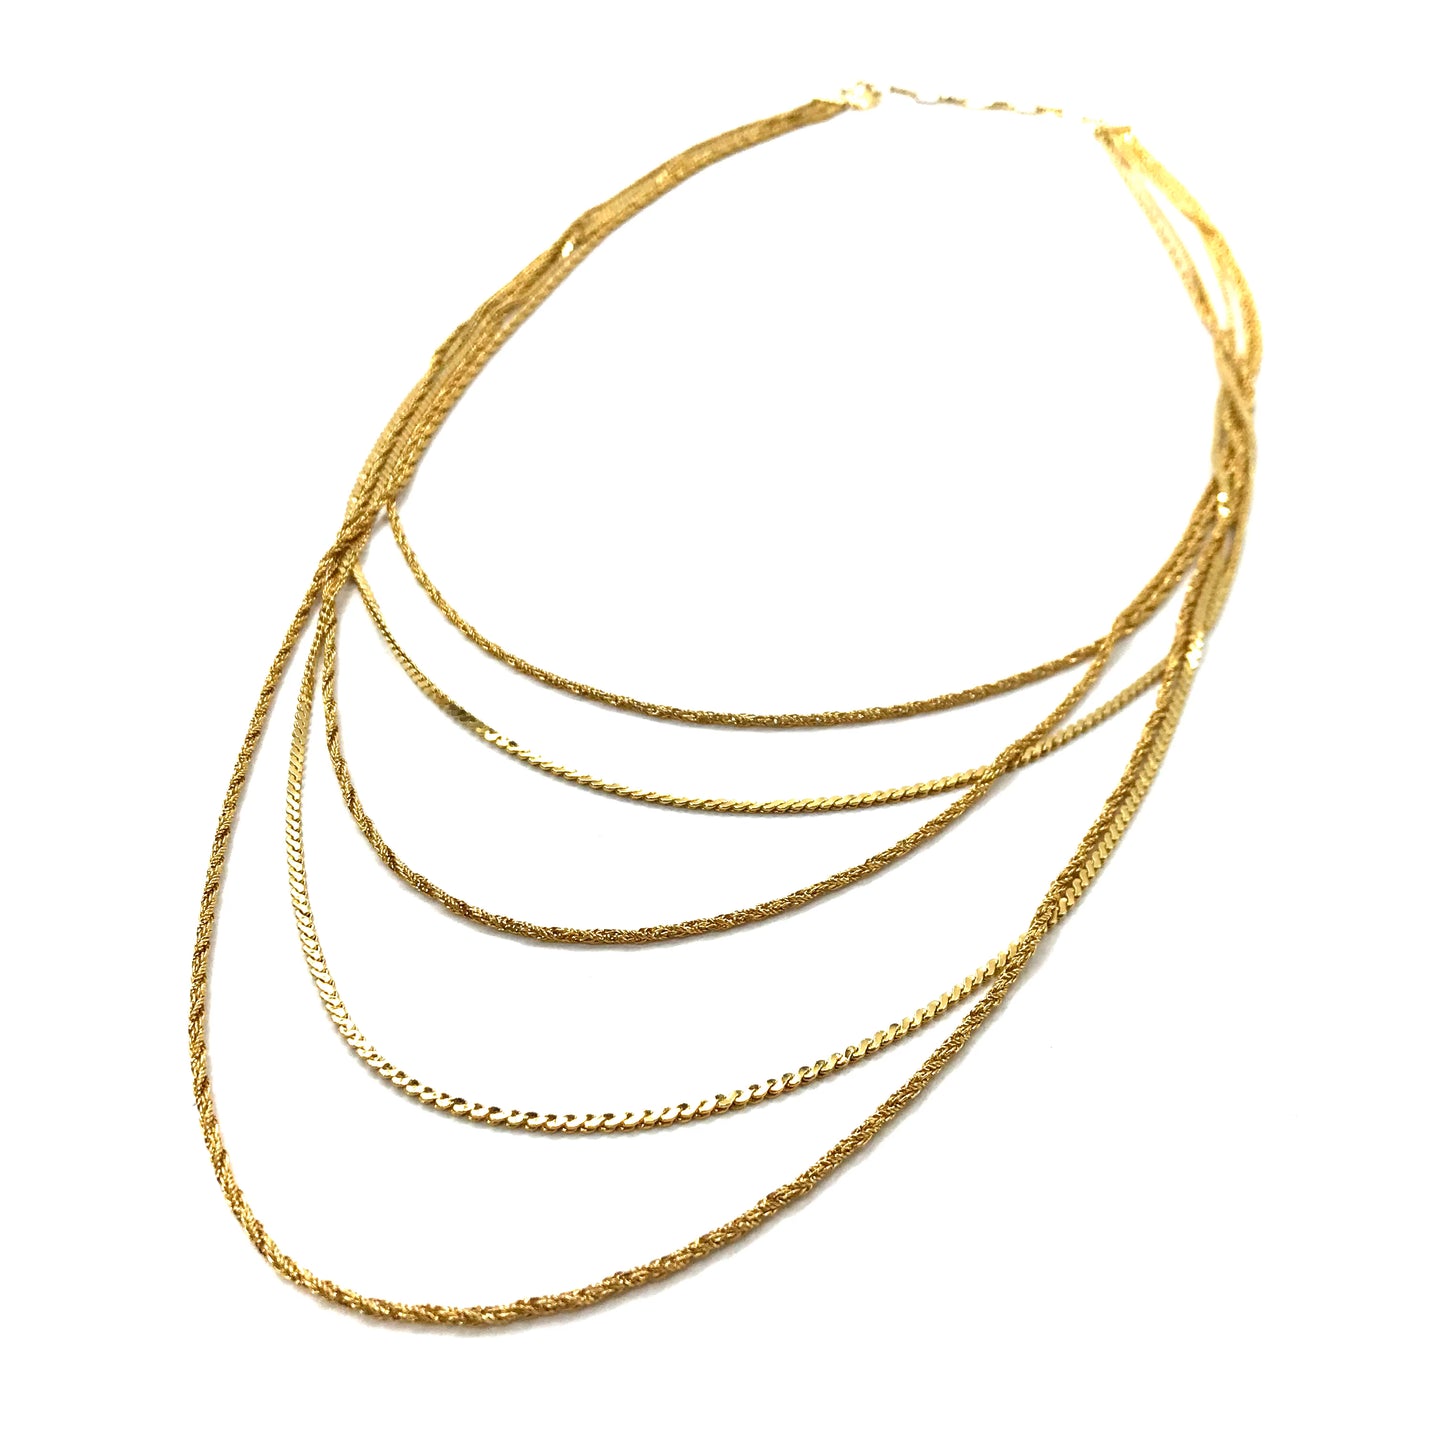 VINTAGE Gold Chain Necklaces 5連 ゴールドチェーンネックレス 73cm 喜平 ロープチェーン